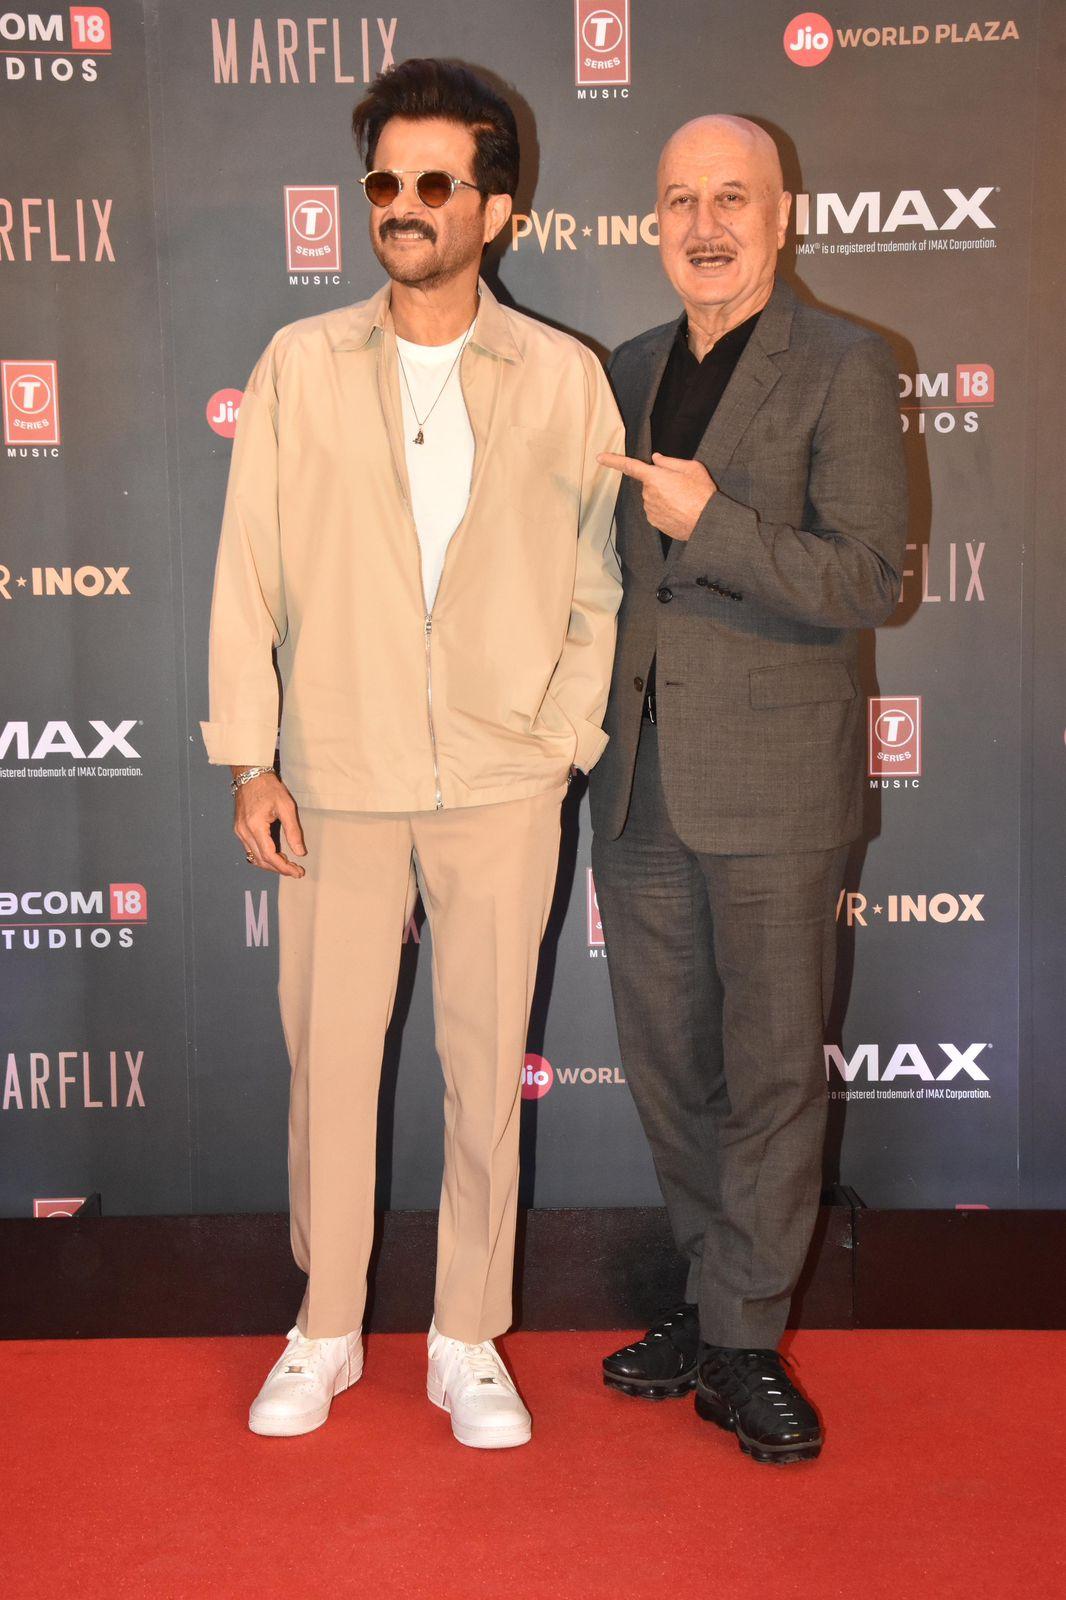 Anupam Kher struck a pose with Anil Kapoor at the movie premiere